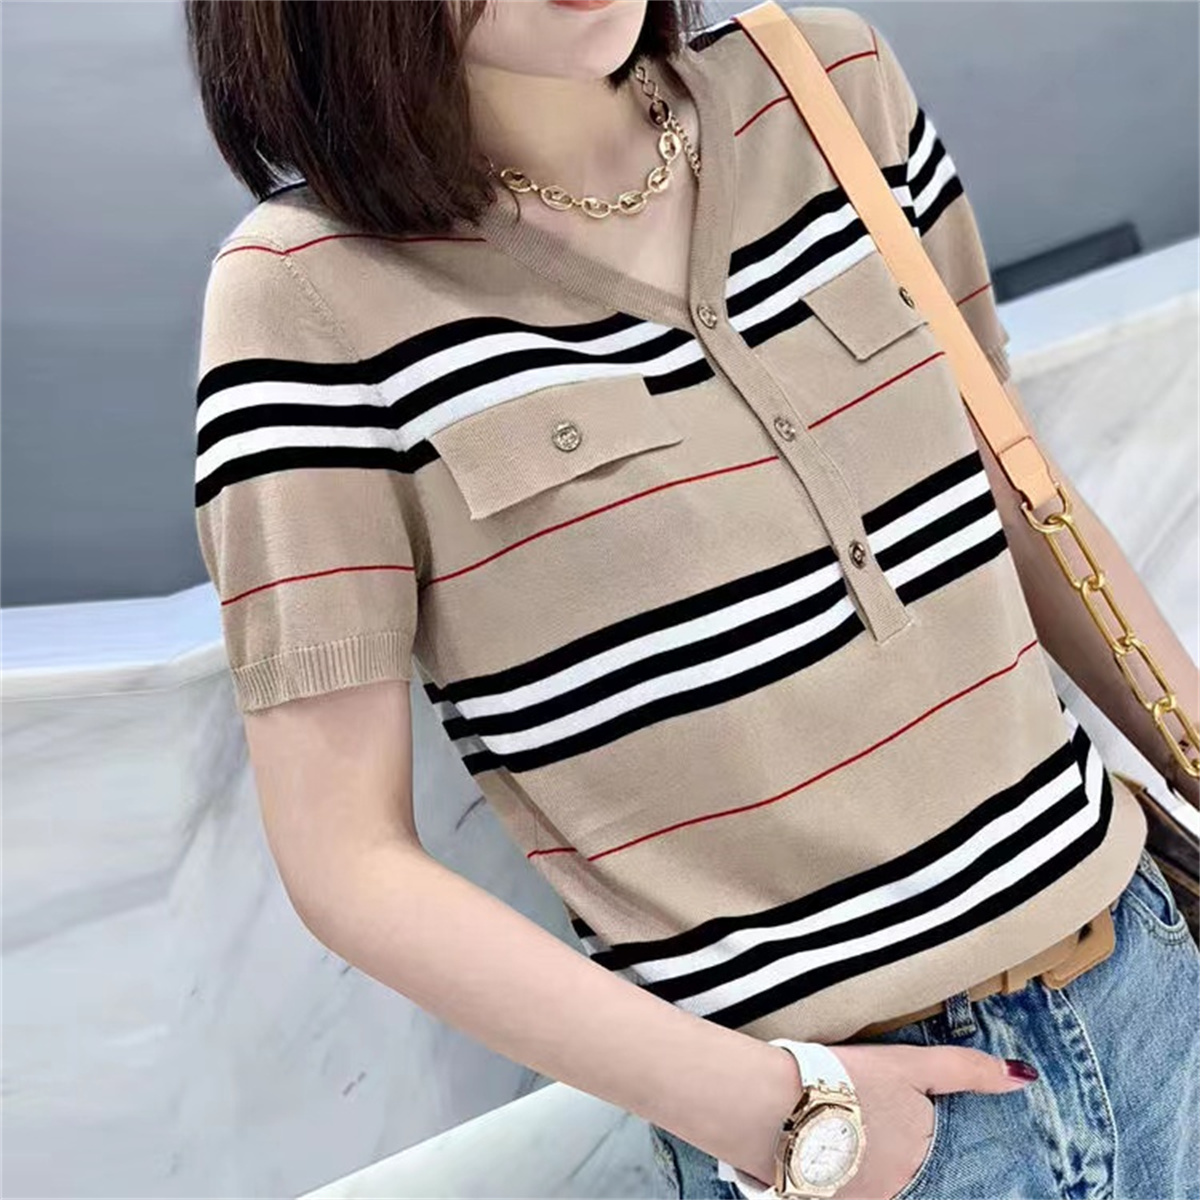 Designer Women's Knits Hollow Out Sweaters Short Sleeve T-shirts Fashion Pullover Plaid Embossed Print Knitting Top T-shirt Size S-2XL